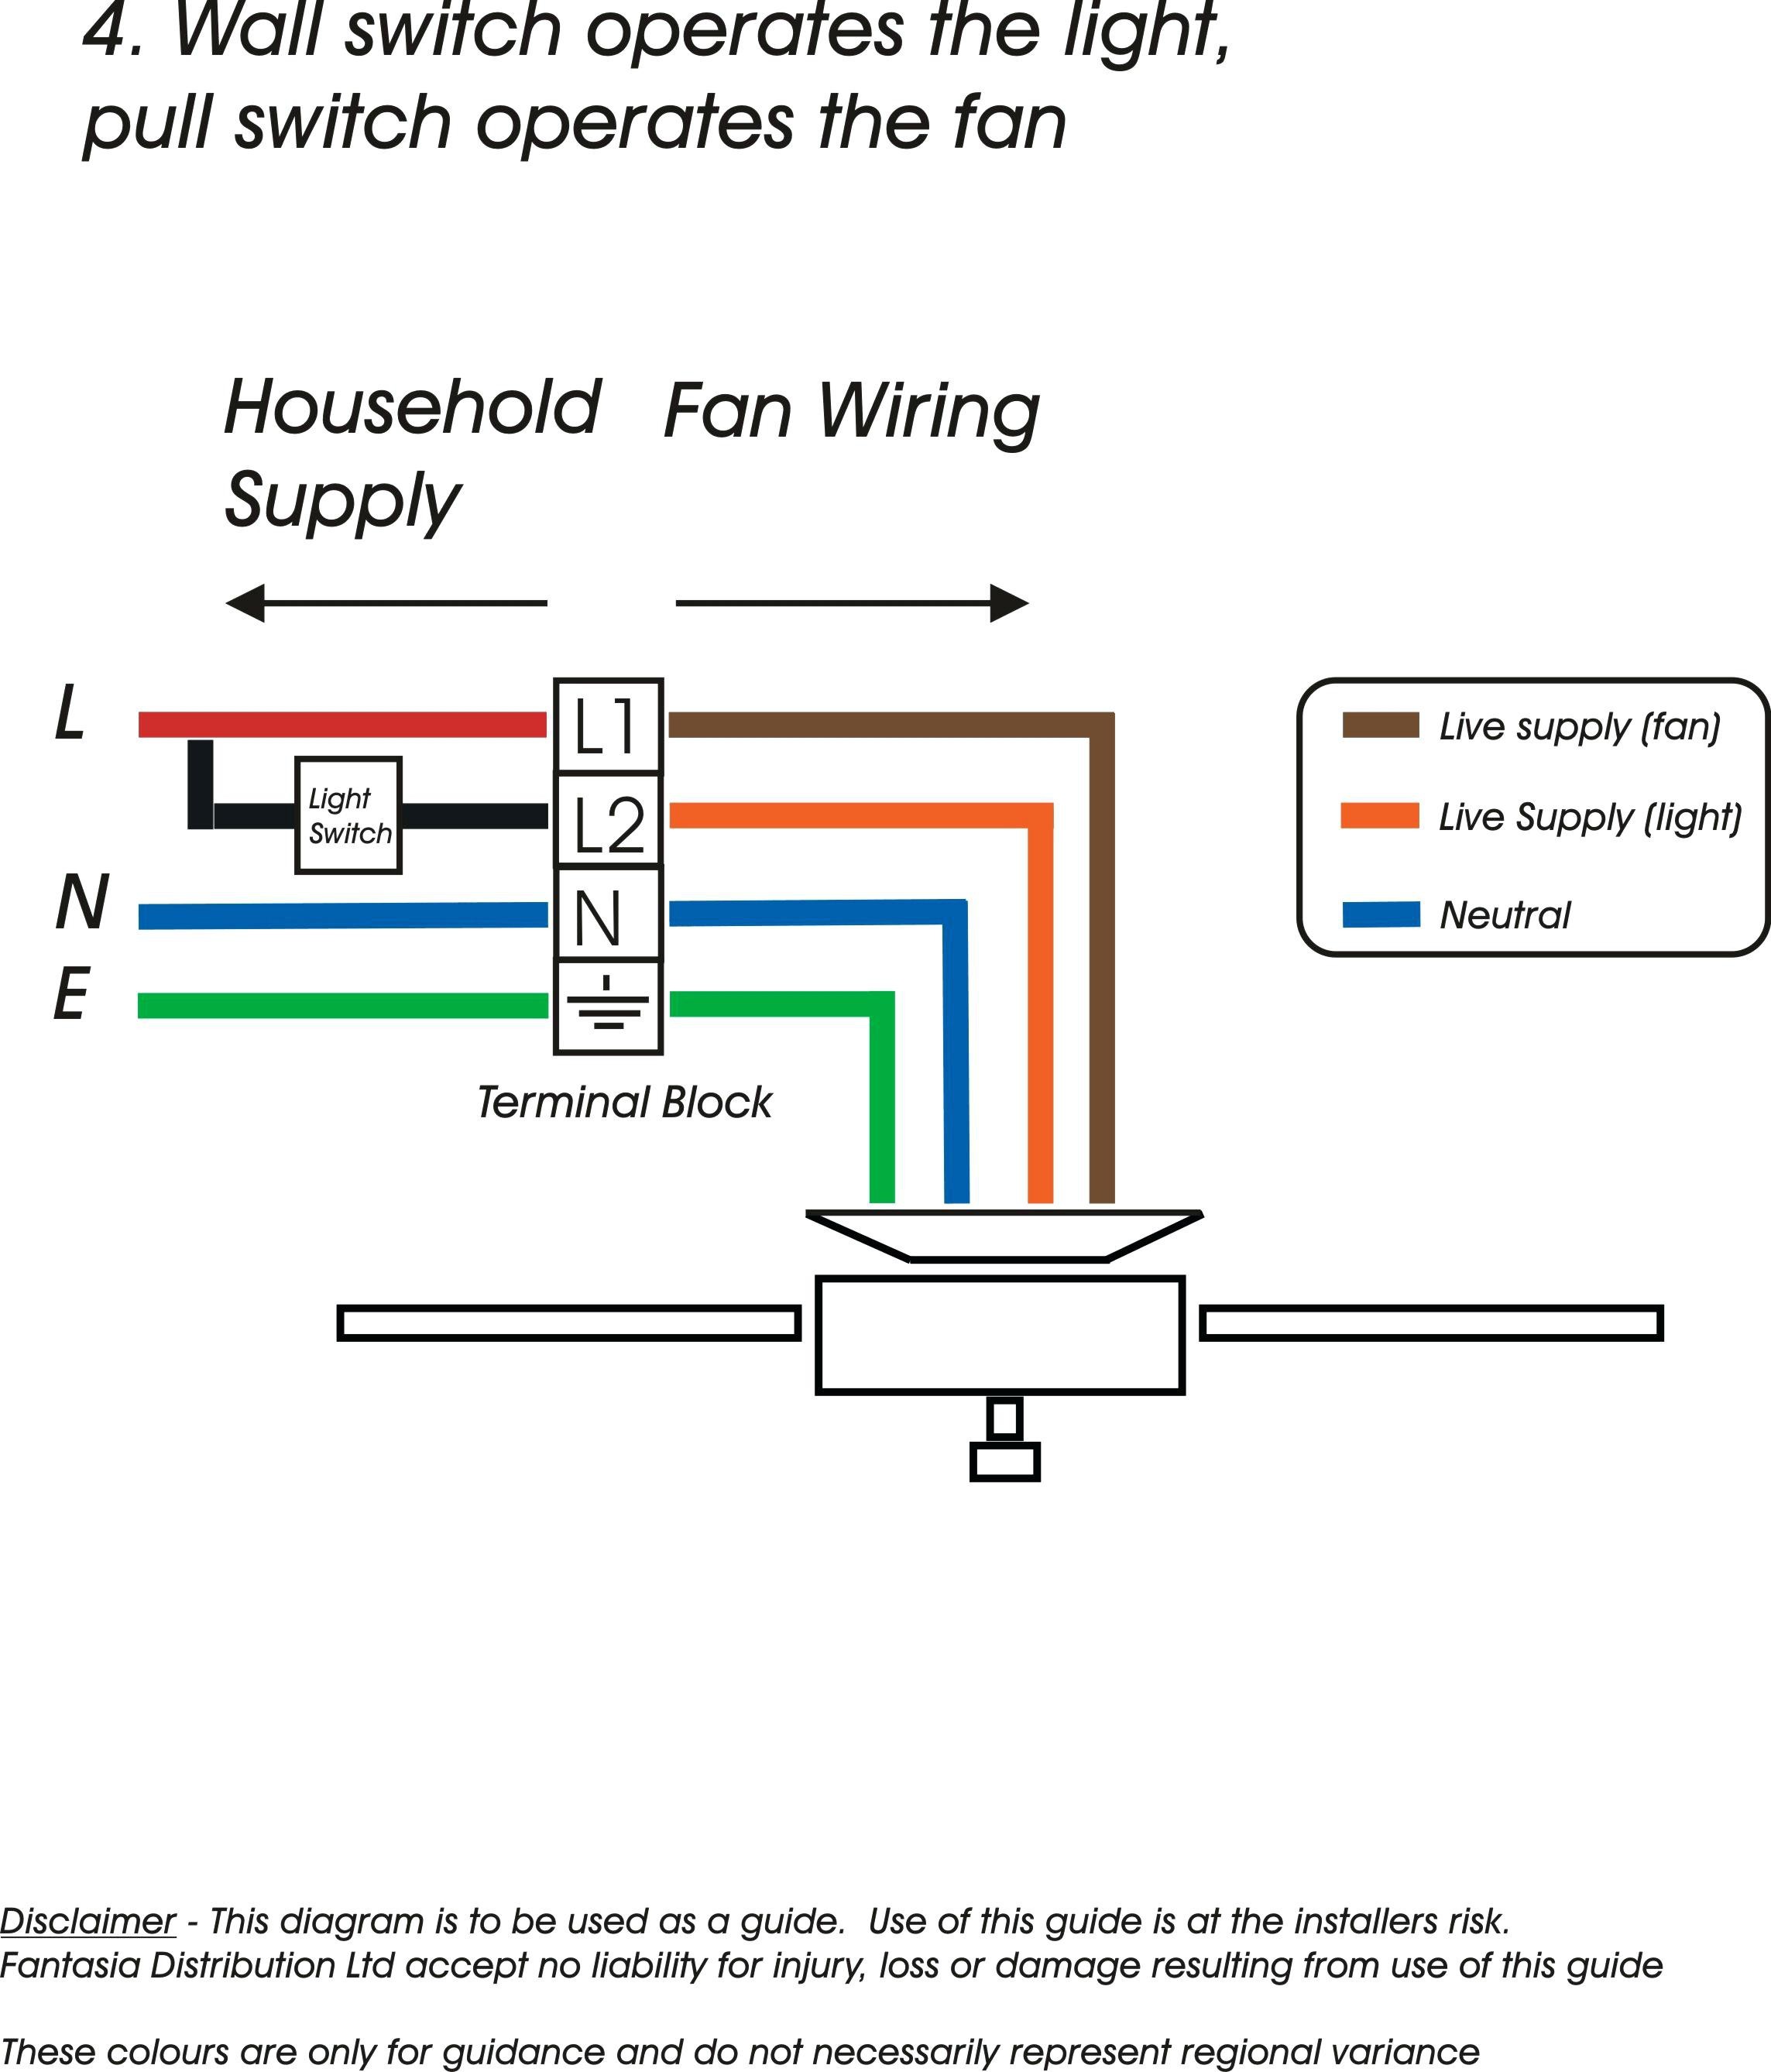 Light Switch Wiring Diagram Lovely Wiring A Bathroom Fan and Light Lighting Diagram Installing Heater